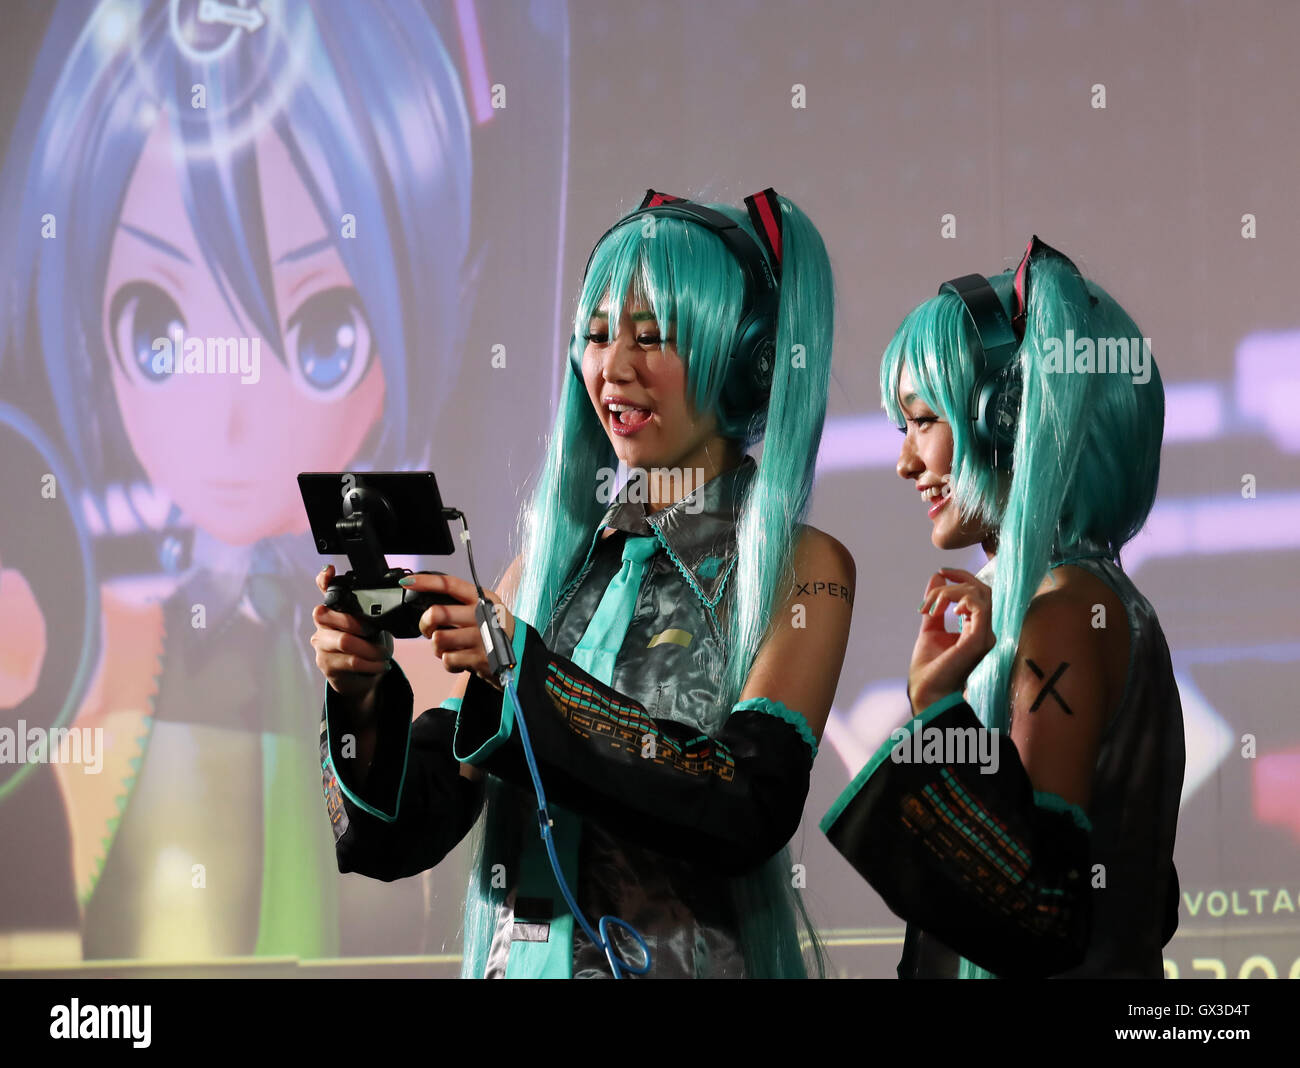 Thursday. 15th Sep, 2016. Models in costume of Hatsune Miku plays videogame with Sony's Xperia smartphone at the annual Tokyo Game Show in Chiba, suburban Tokyo on Thursday, September 15, 2016. The 20th anniversary Show includes show a new Virtual Reality (VR) area. The event hosts 614 exhibitors from 37 different countries and runs from September 15 to 18 at the International Convention Complex Makuhari Messe in Chiba. 1,523 game titles for smartphones, games consoles, PC and VR platforms are on show. Credit:  Yoshio Tsunoda/AFLO/Alamy Live News Stock Photo